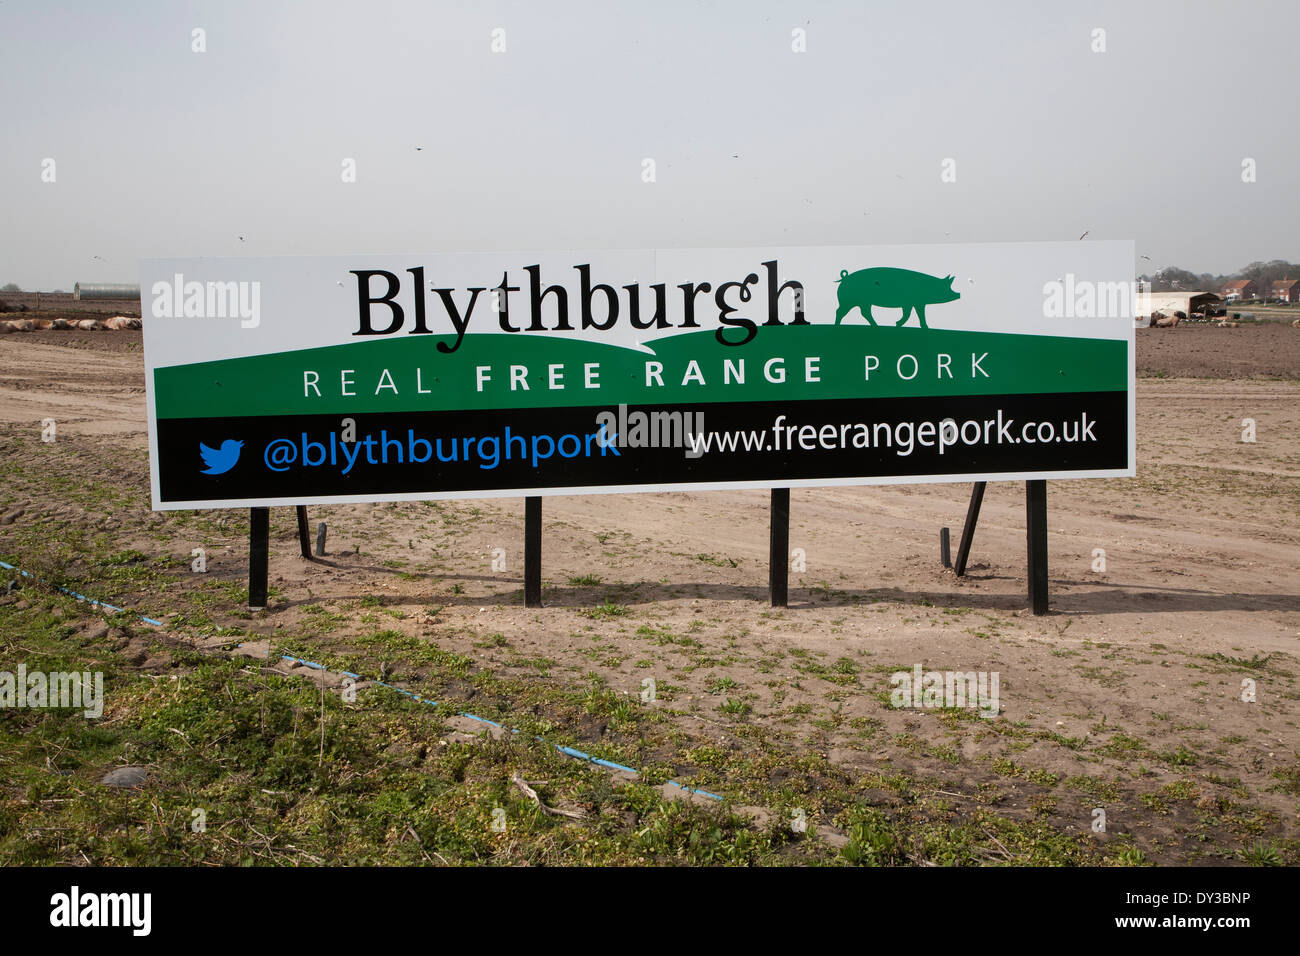 Sign in field of pigs advertising Real Free Range Pork, Blythburgh, Suffolk, England Stock Photo